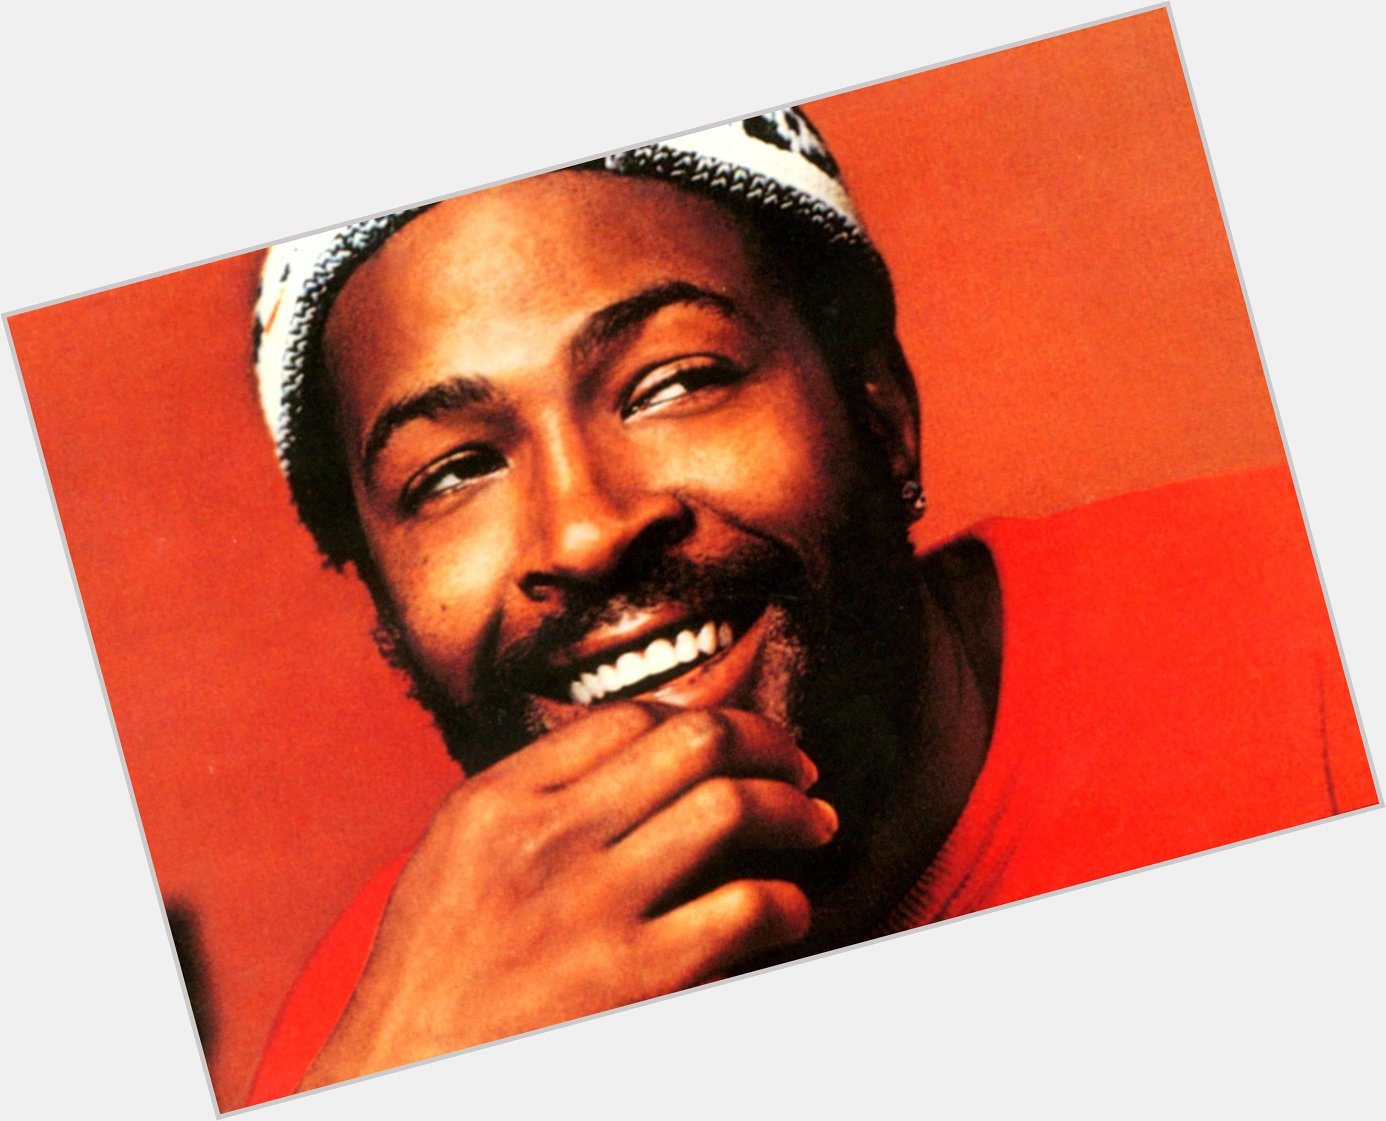 Happy Birthday, Marvin Gaye! The singer would have been 76 today. 